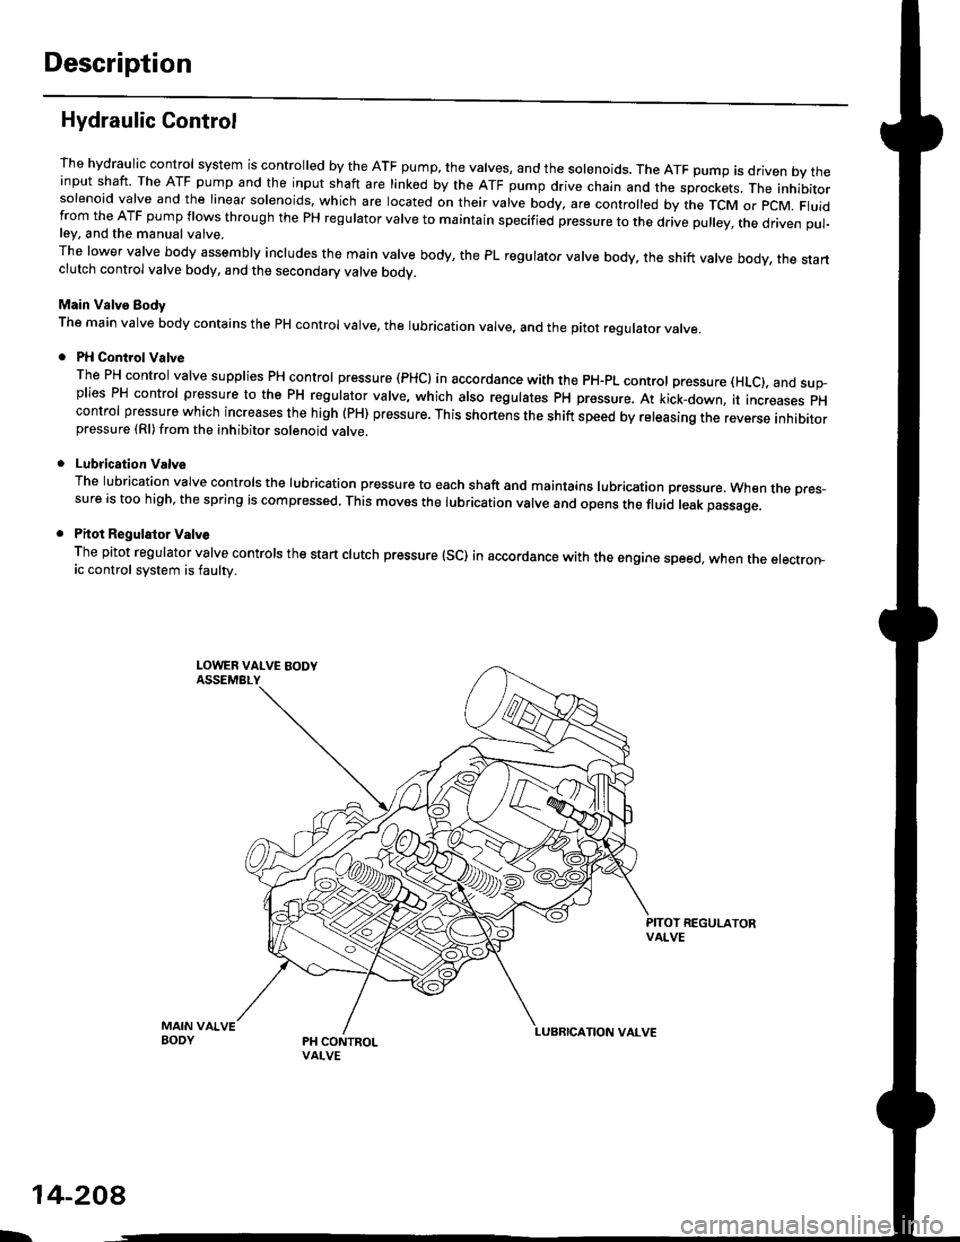 HONDA CIVIC 1996 6.G Workshop Manual Description
Hydraulic Control
The hydraulic control system is controlled by the ATF pump. the valves, and the solenoids. The ATF pump is driven by theinput shaft. The ATF pump and the input shaft are 